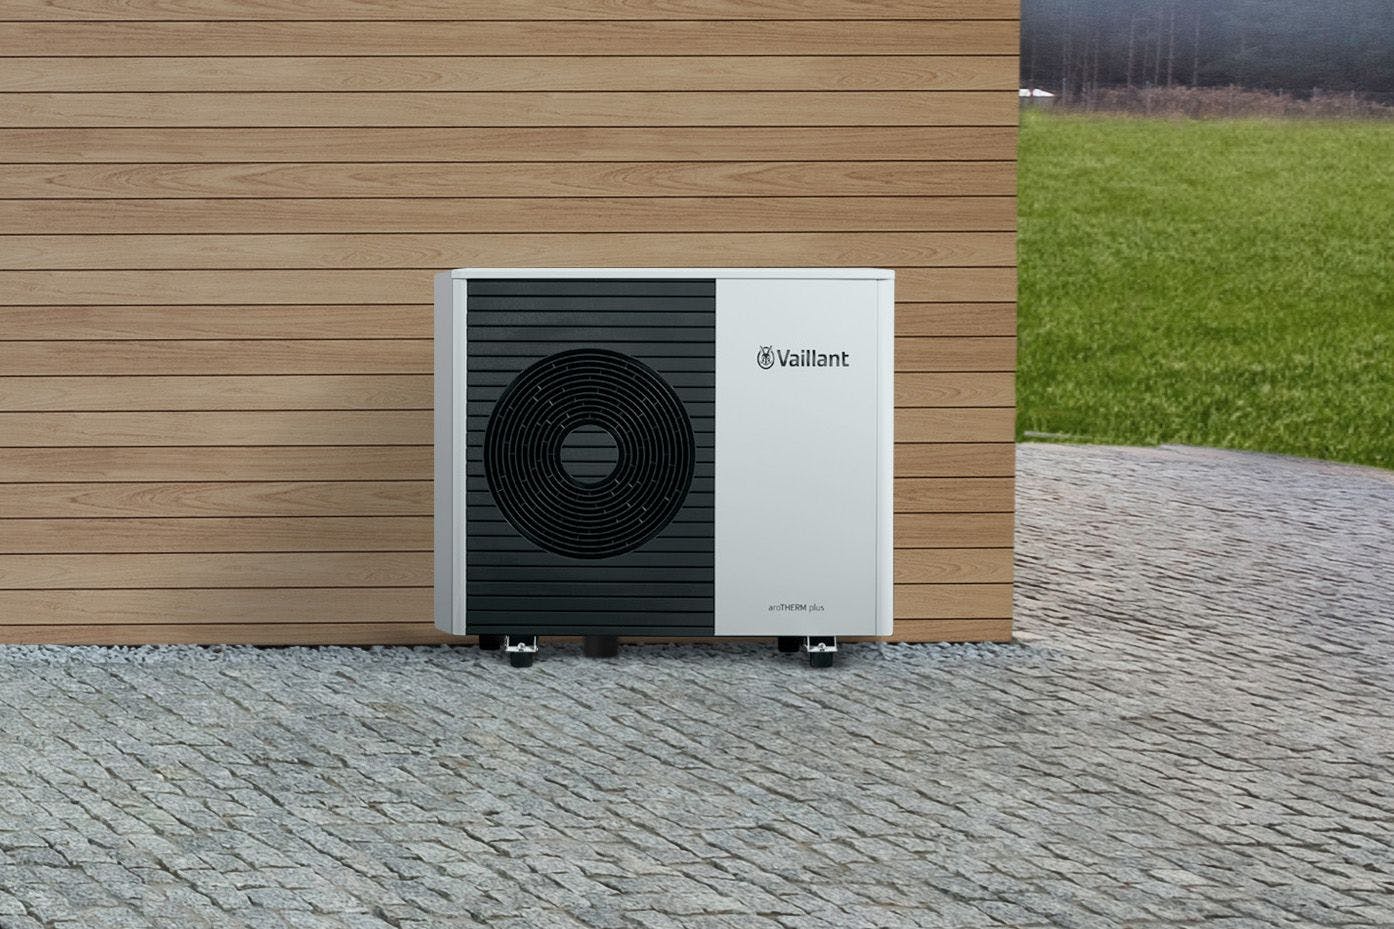 Vaillant aroTHERM plus 6-8kW air source heat pump outside a home